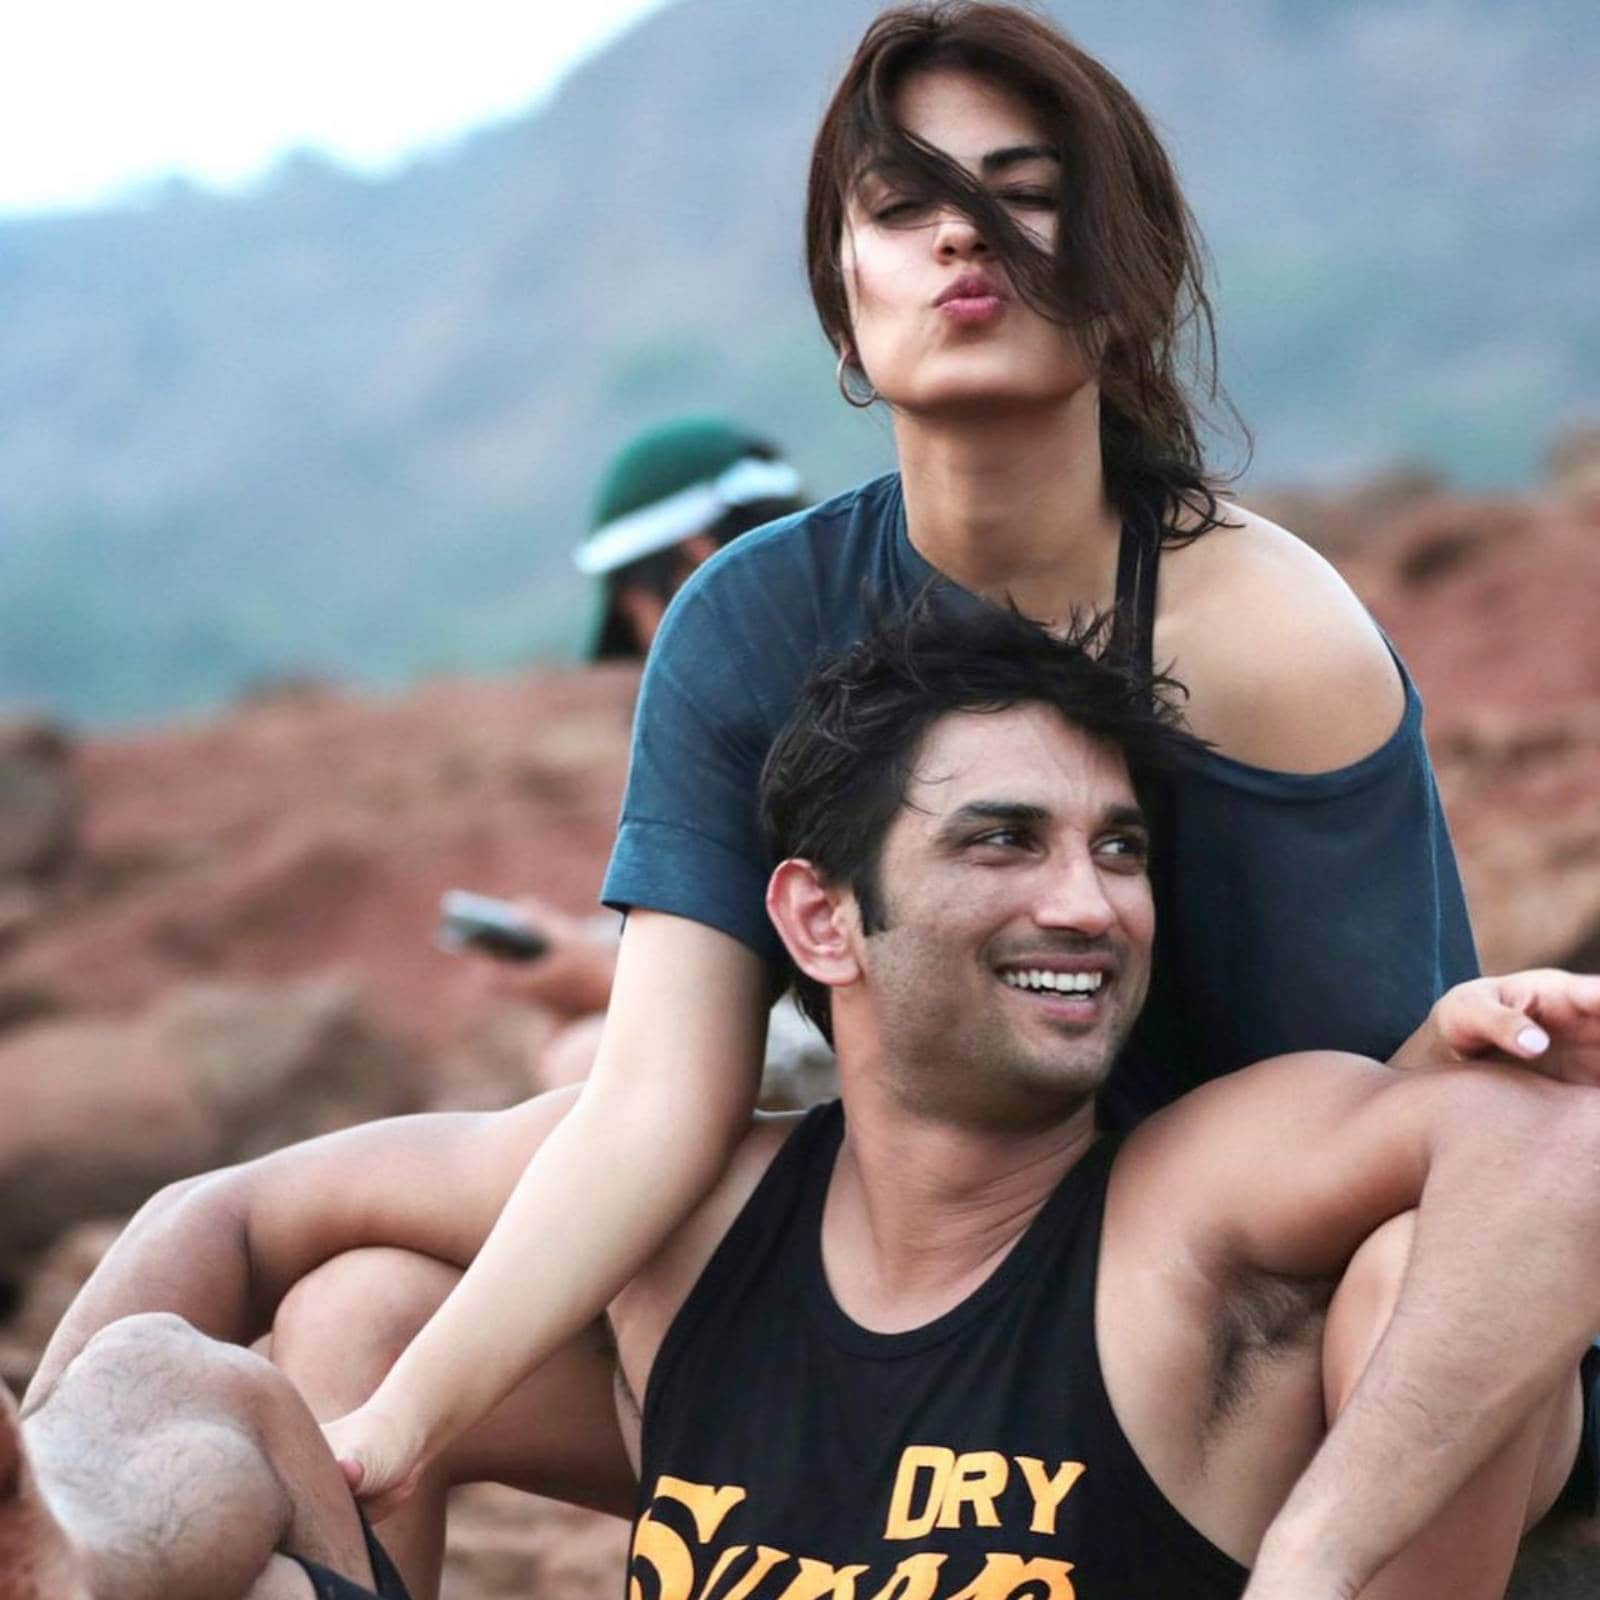 Sushant Singh Rajput Case: Rhea Chakraborty Received Many Deliveries of  Ganja from Co-accused, Says NCB in Draft Charges